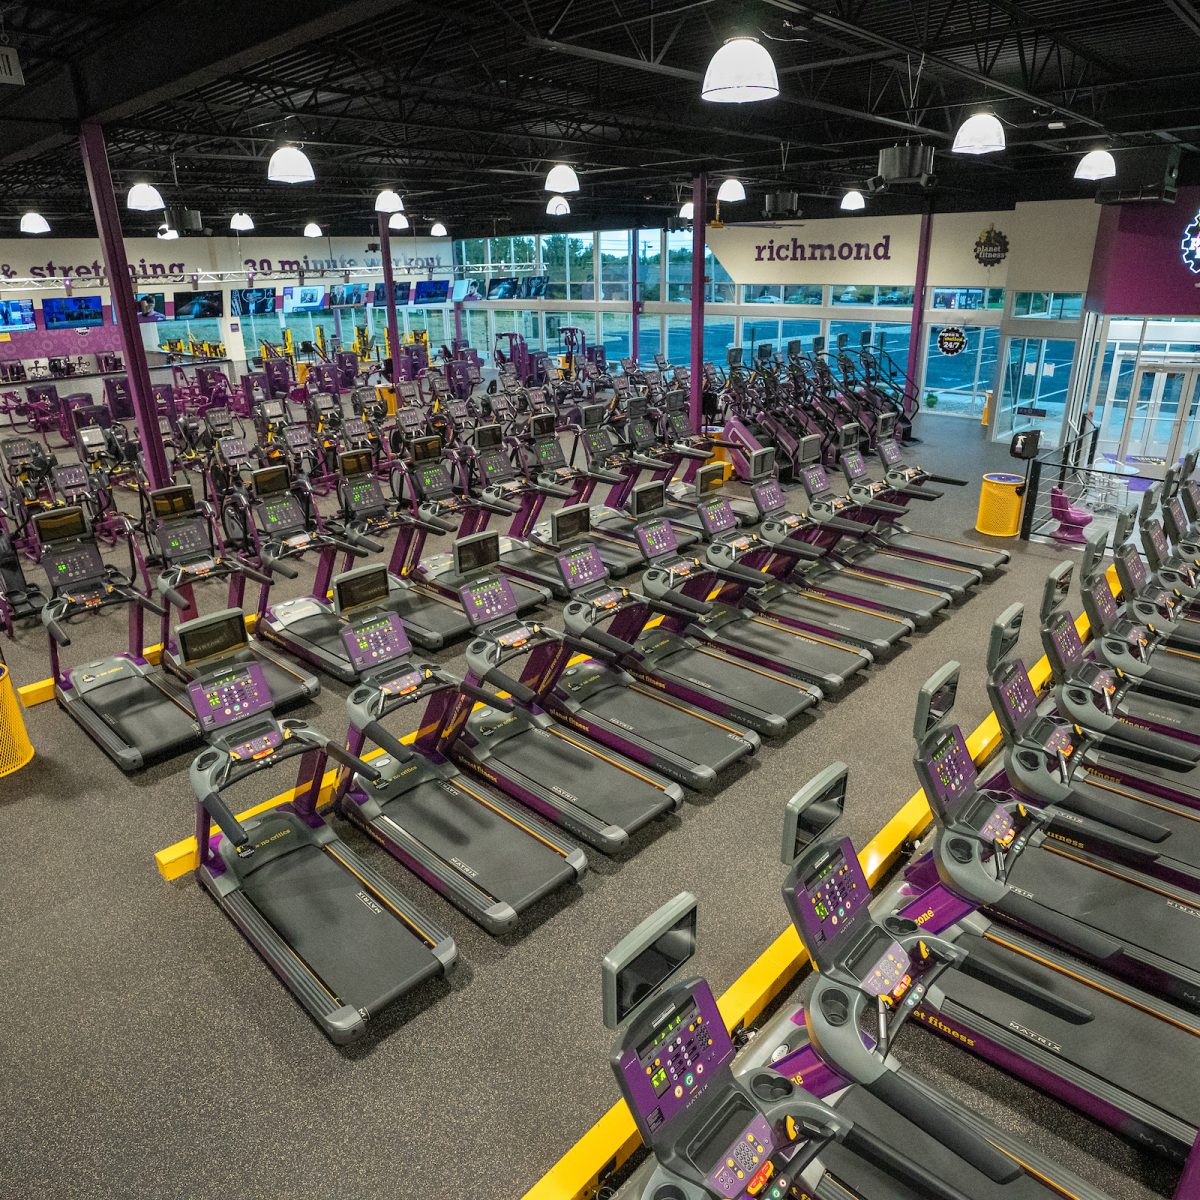 Planet Fitness of Richmond, Monday May 18, 2020  in Richmond, Ky. Photo by Mark Mahan